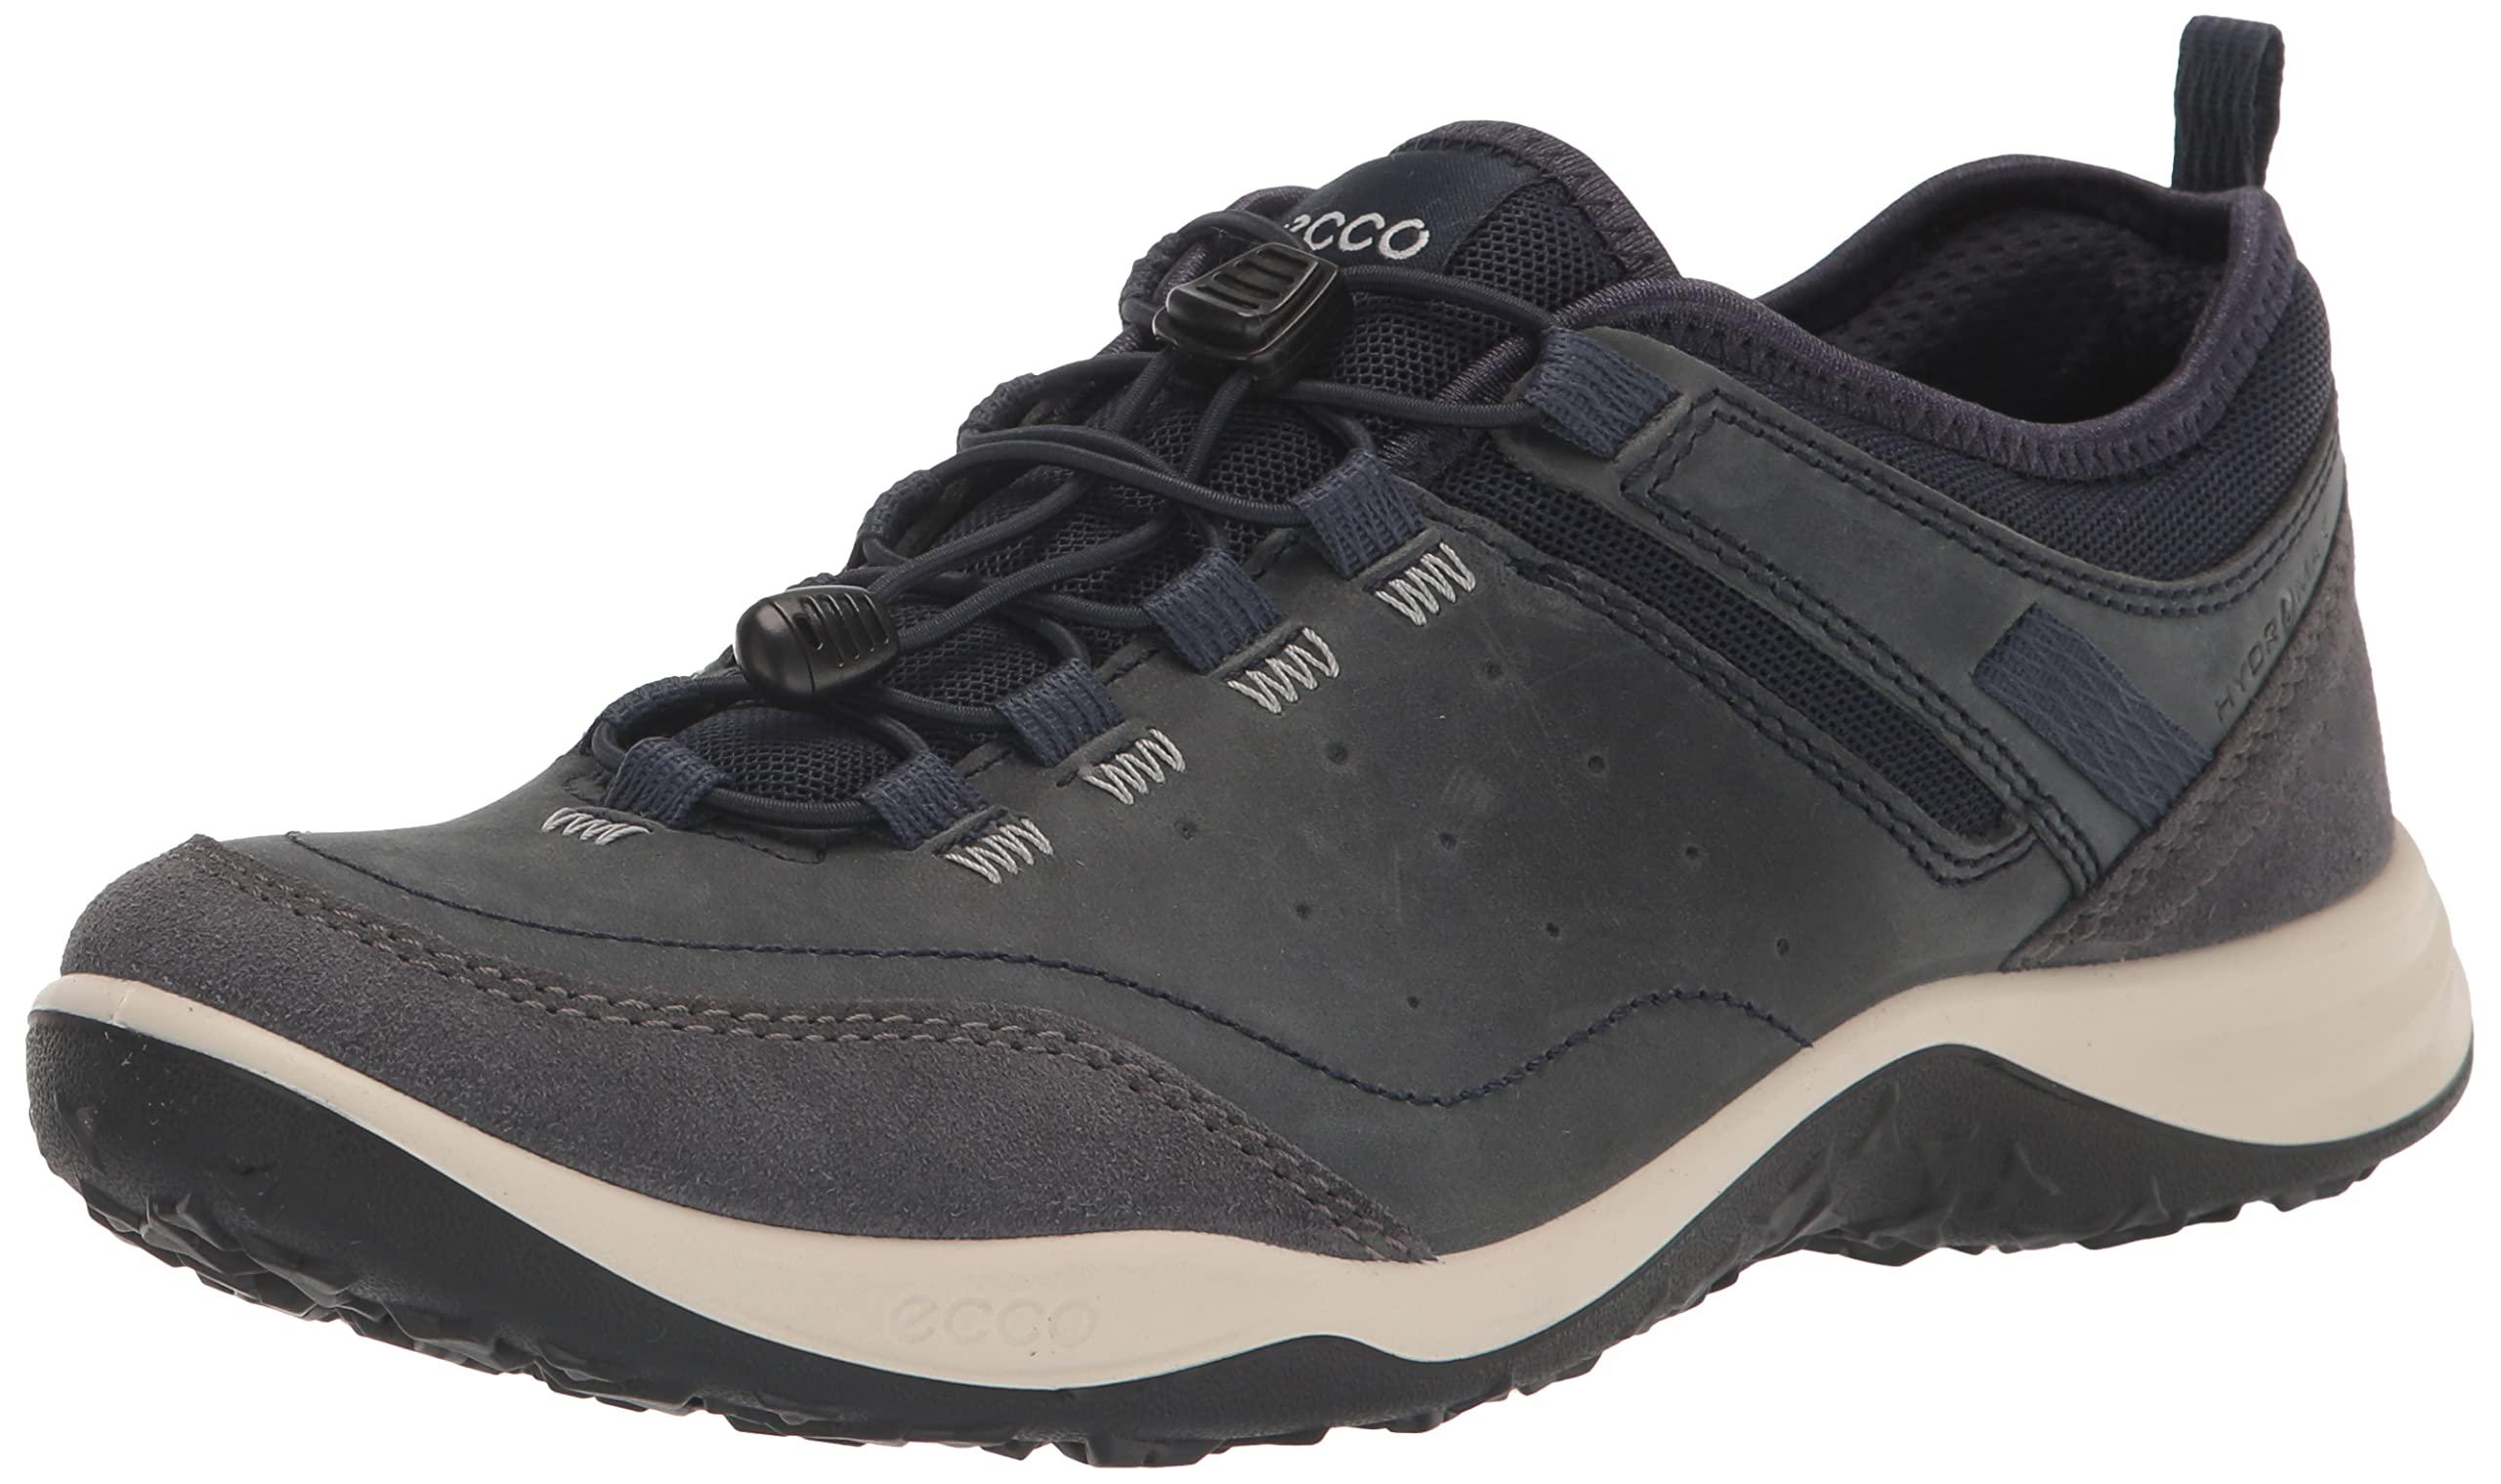 Are Ecco Shoes Good For Walking | lupon.gov.ph